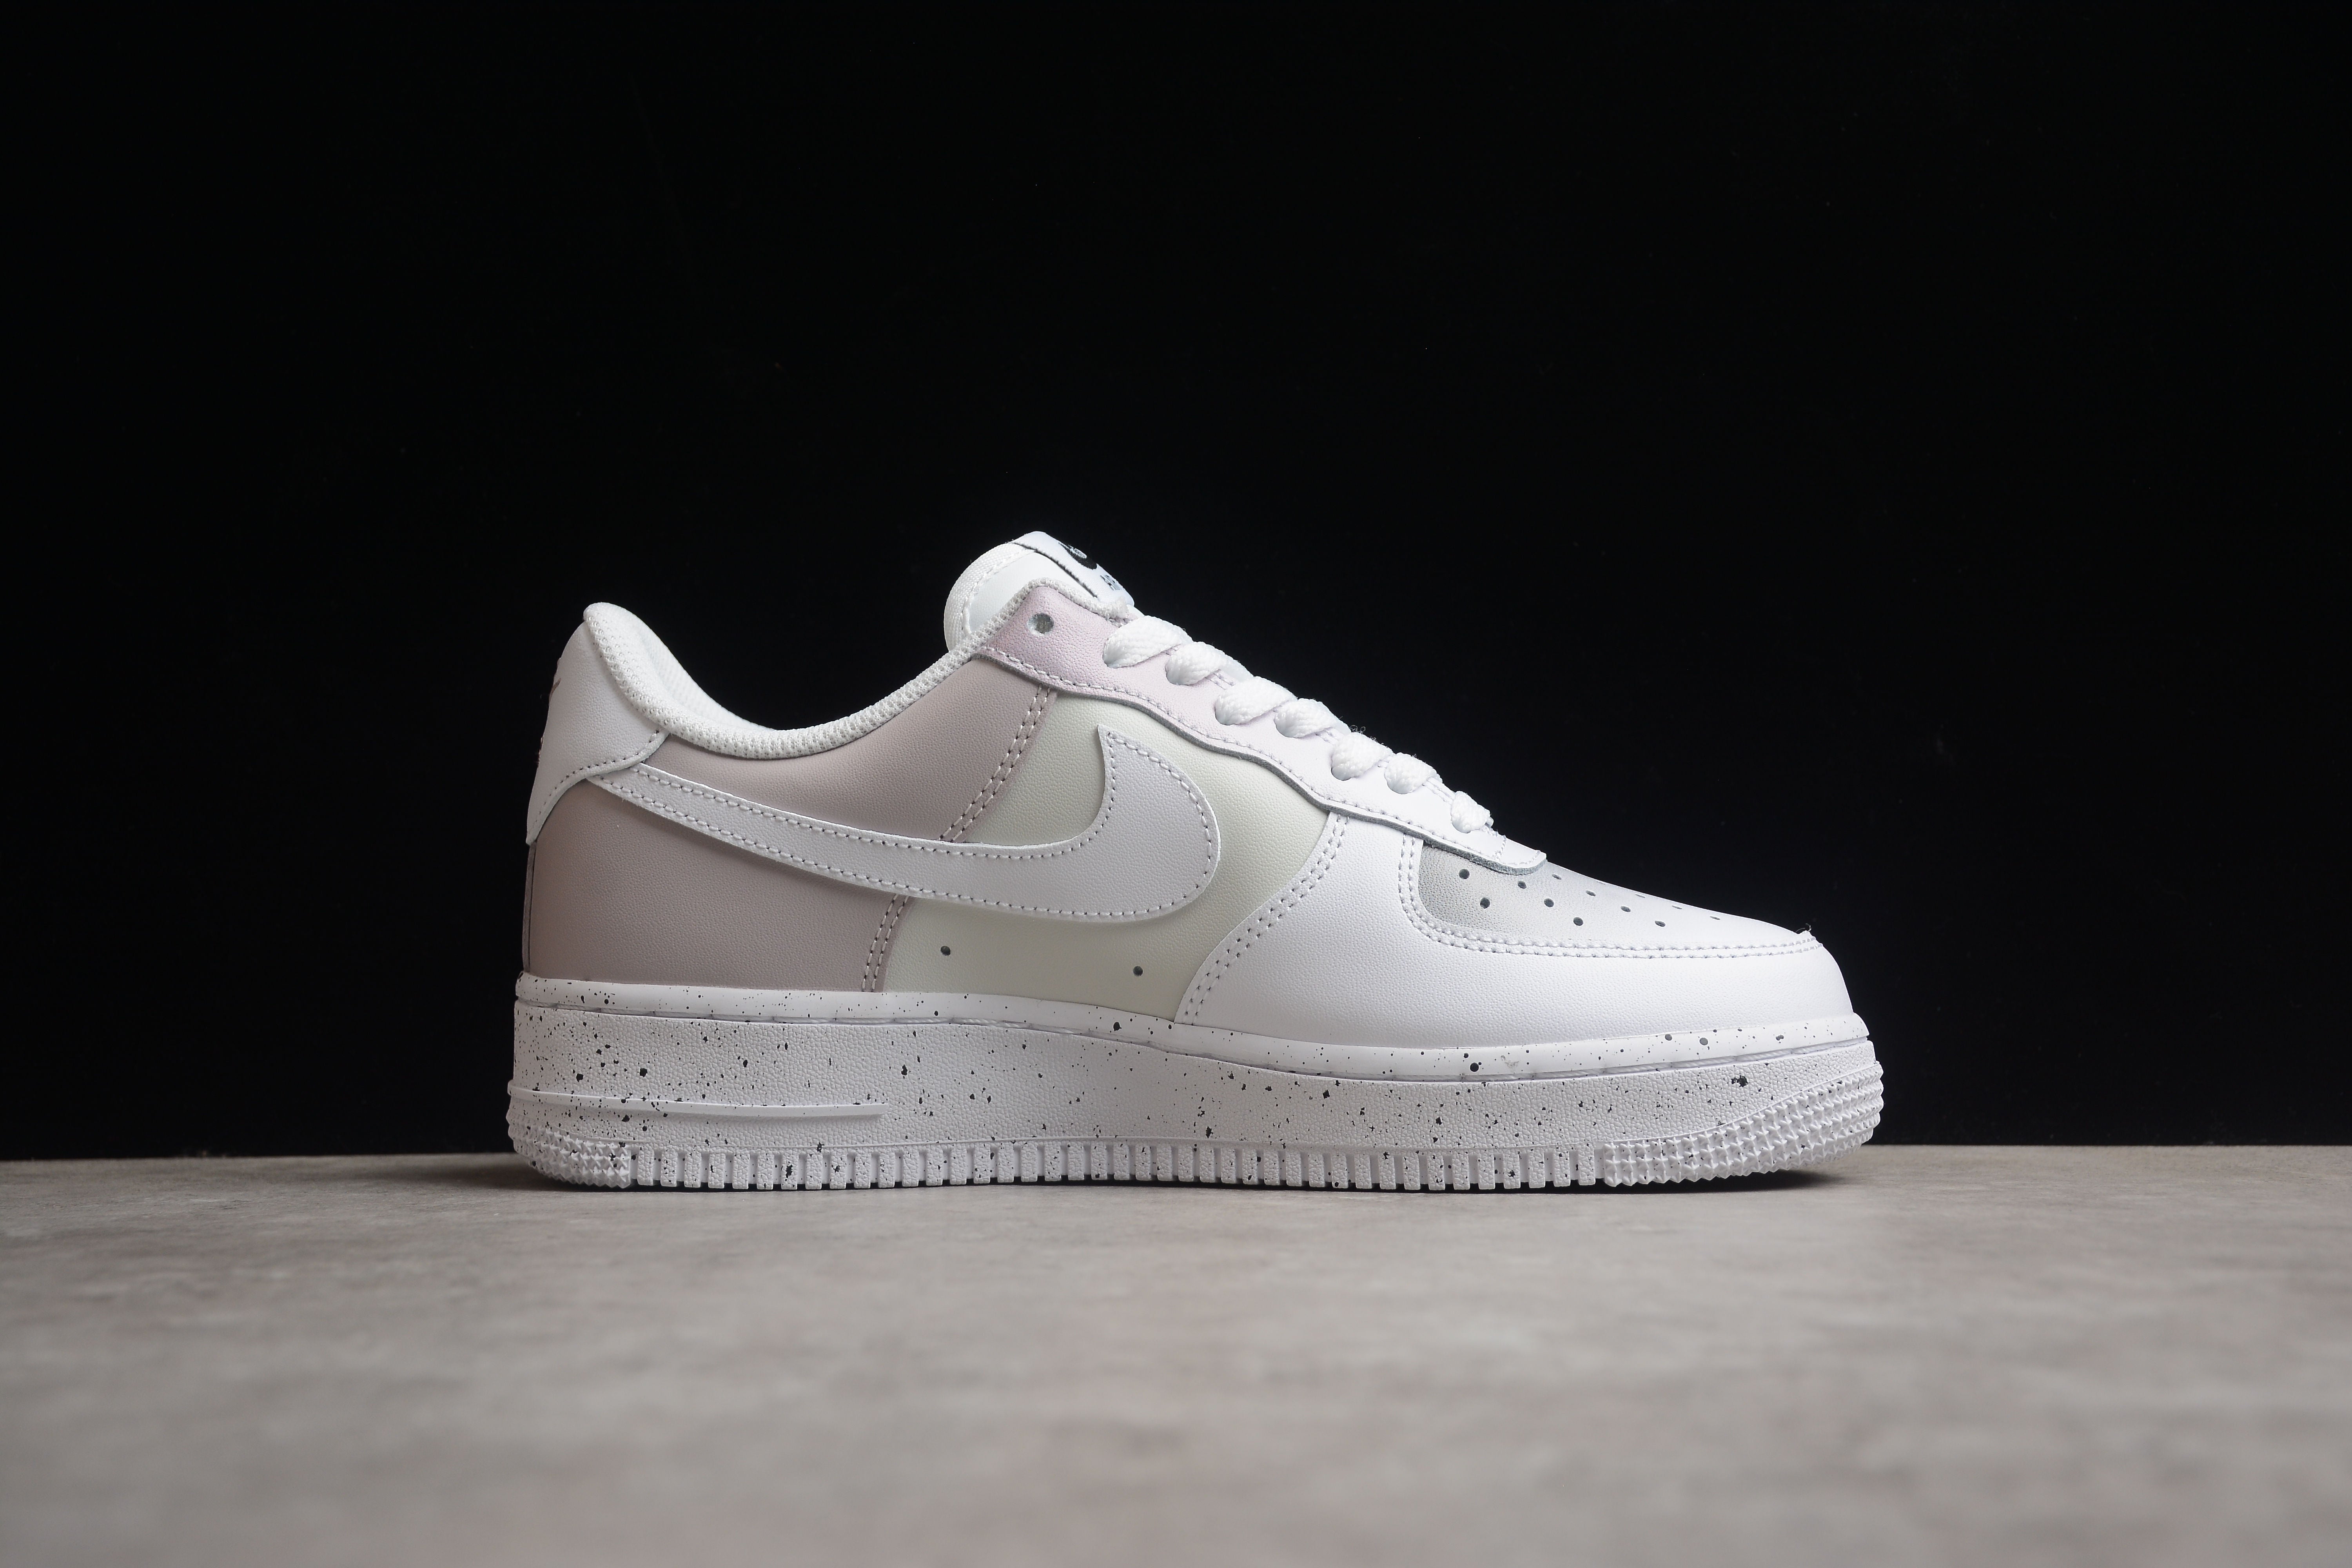 Nike airforce A1 grey shoes